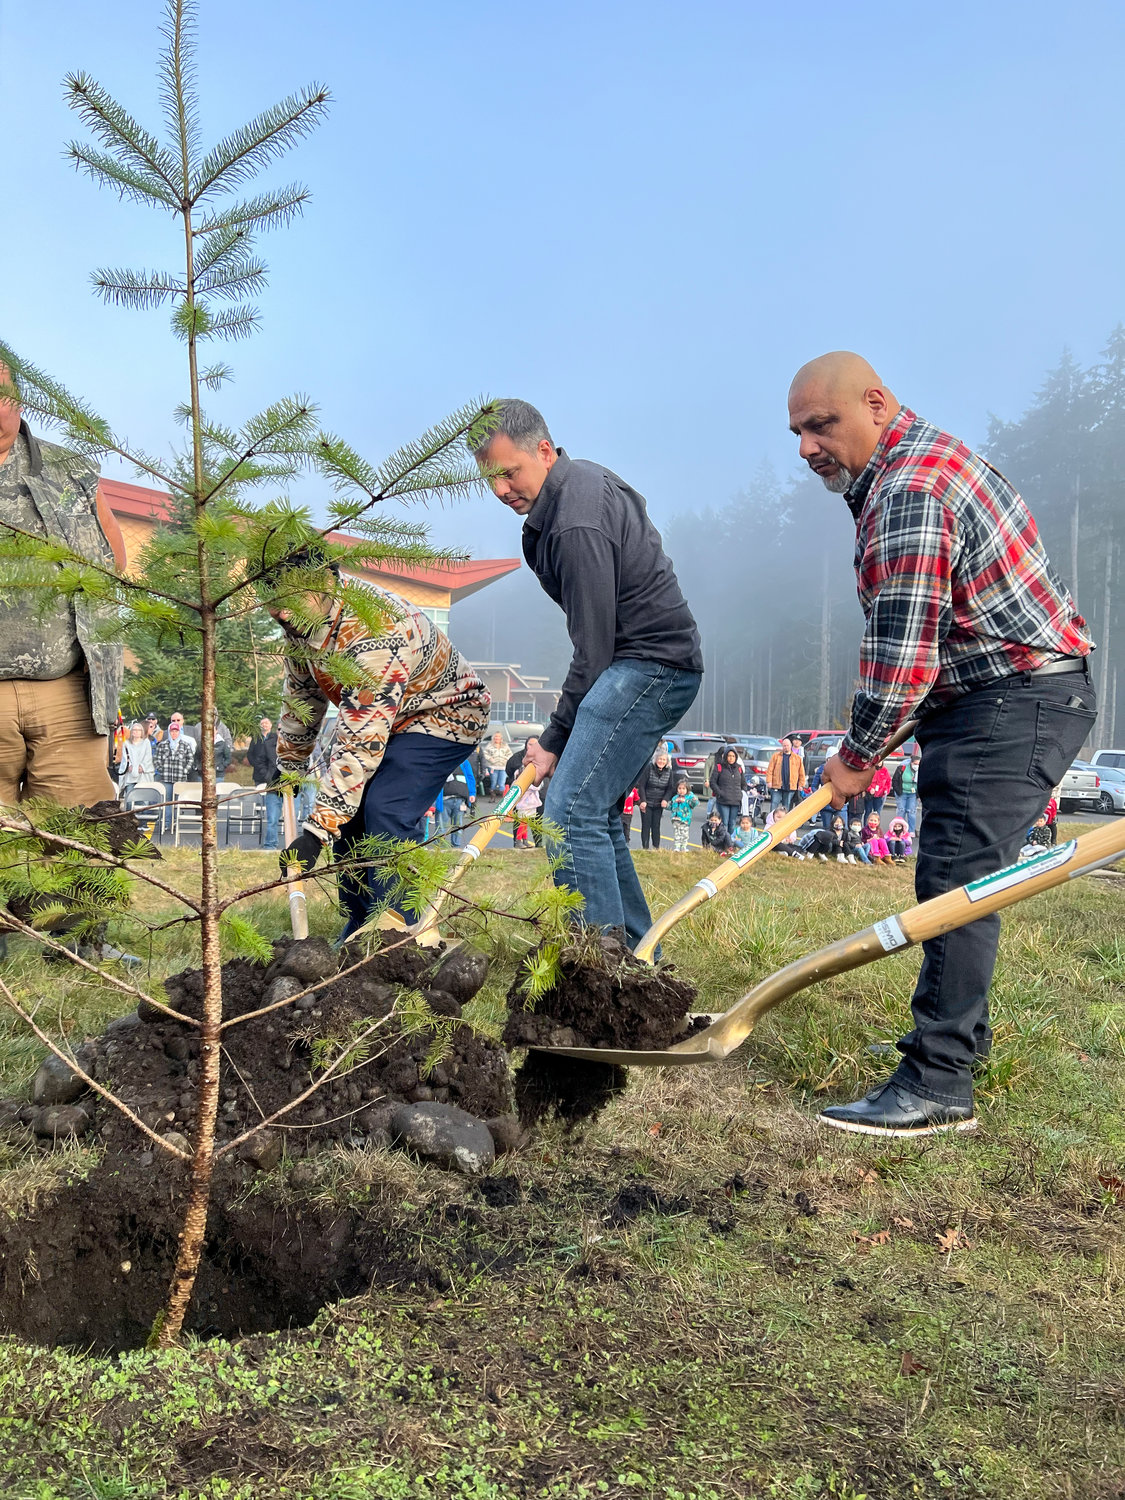 Members from various tribes involved with the Medicine Creek Treaty’s original signing in 1854 help plant a descendant of the tree the treaty was originally signed under to commemorate the 196th anniversary of the treaty on Jan. 20.